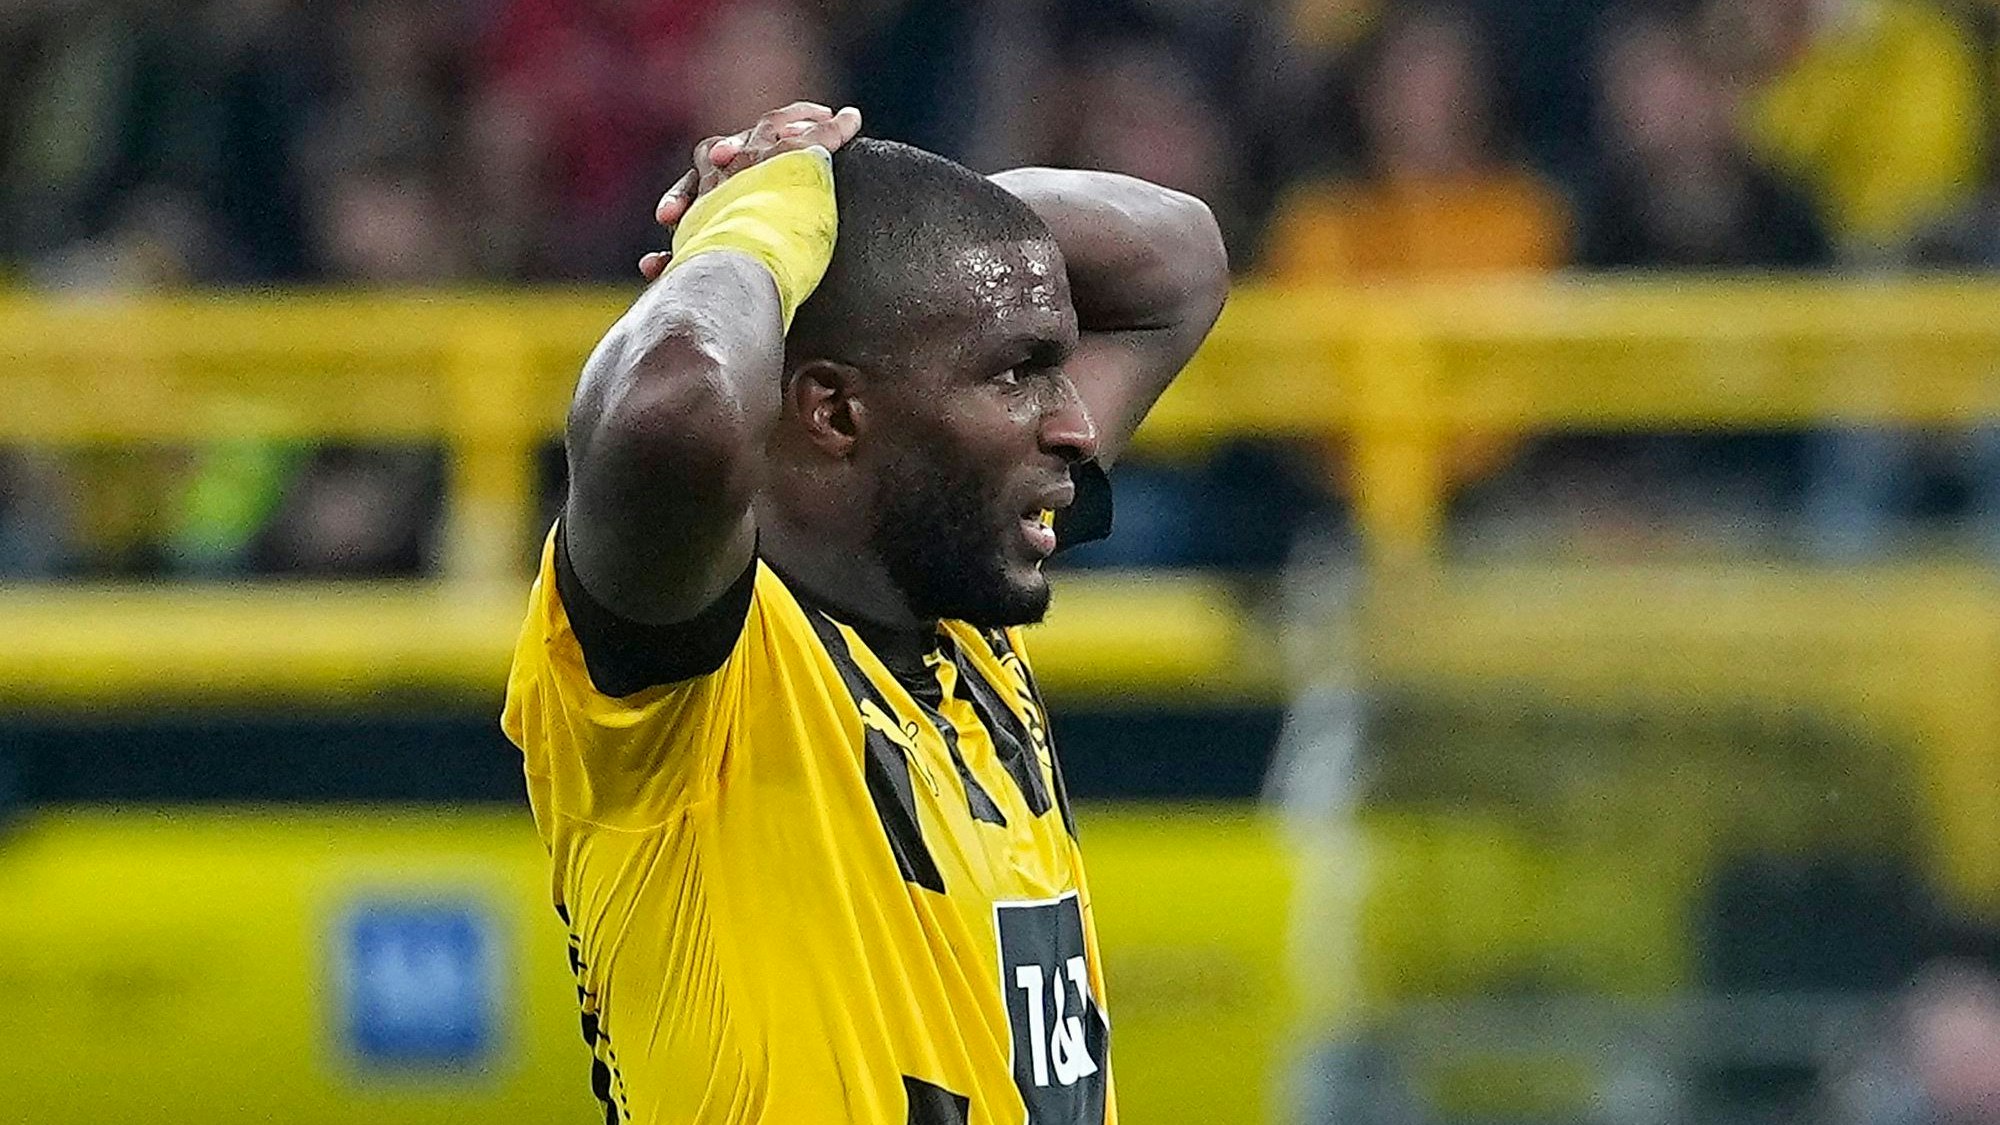 Dortmund's Anthony Modeste reacts after he missed to score during the German Bundesliga soccer match between Borussia Dortmund and TSG Hoffenheim in Dortmund, Germany, Friday, Sept. 2, 2022. (AP Photo/Martin Meissner)